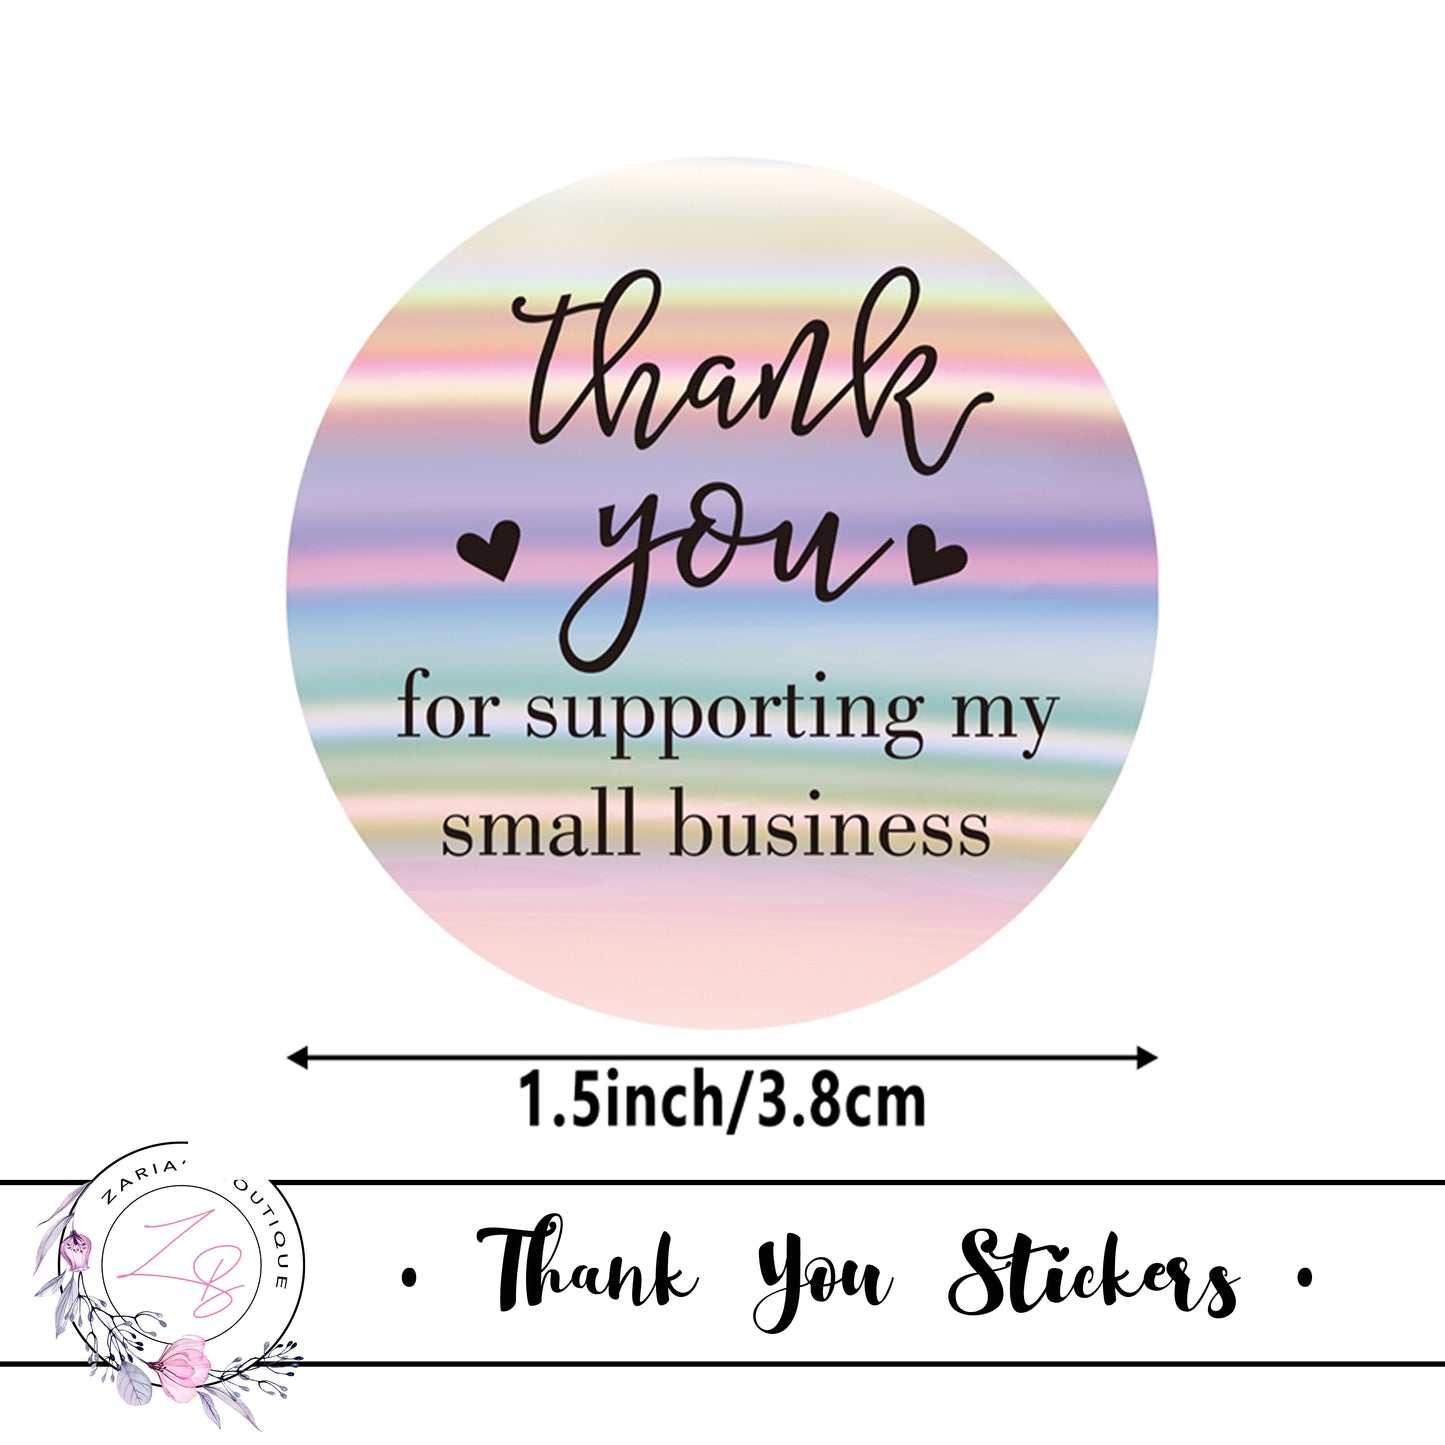 ⋅ Thank You Stickers ⋅ HOLOGRAPHIC ⋅ Small Business Packaging